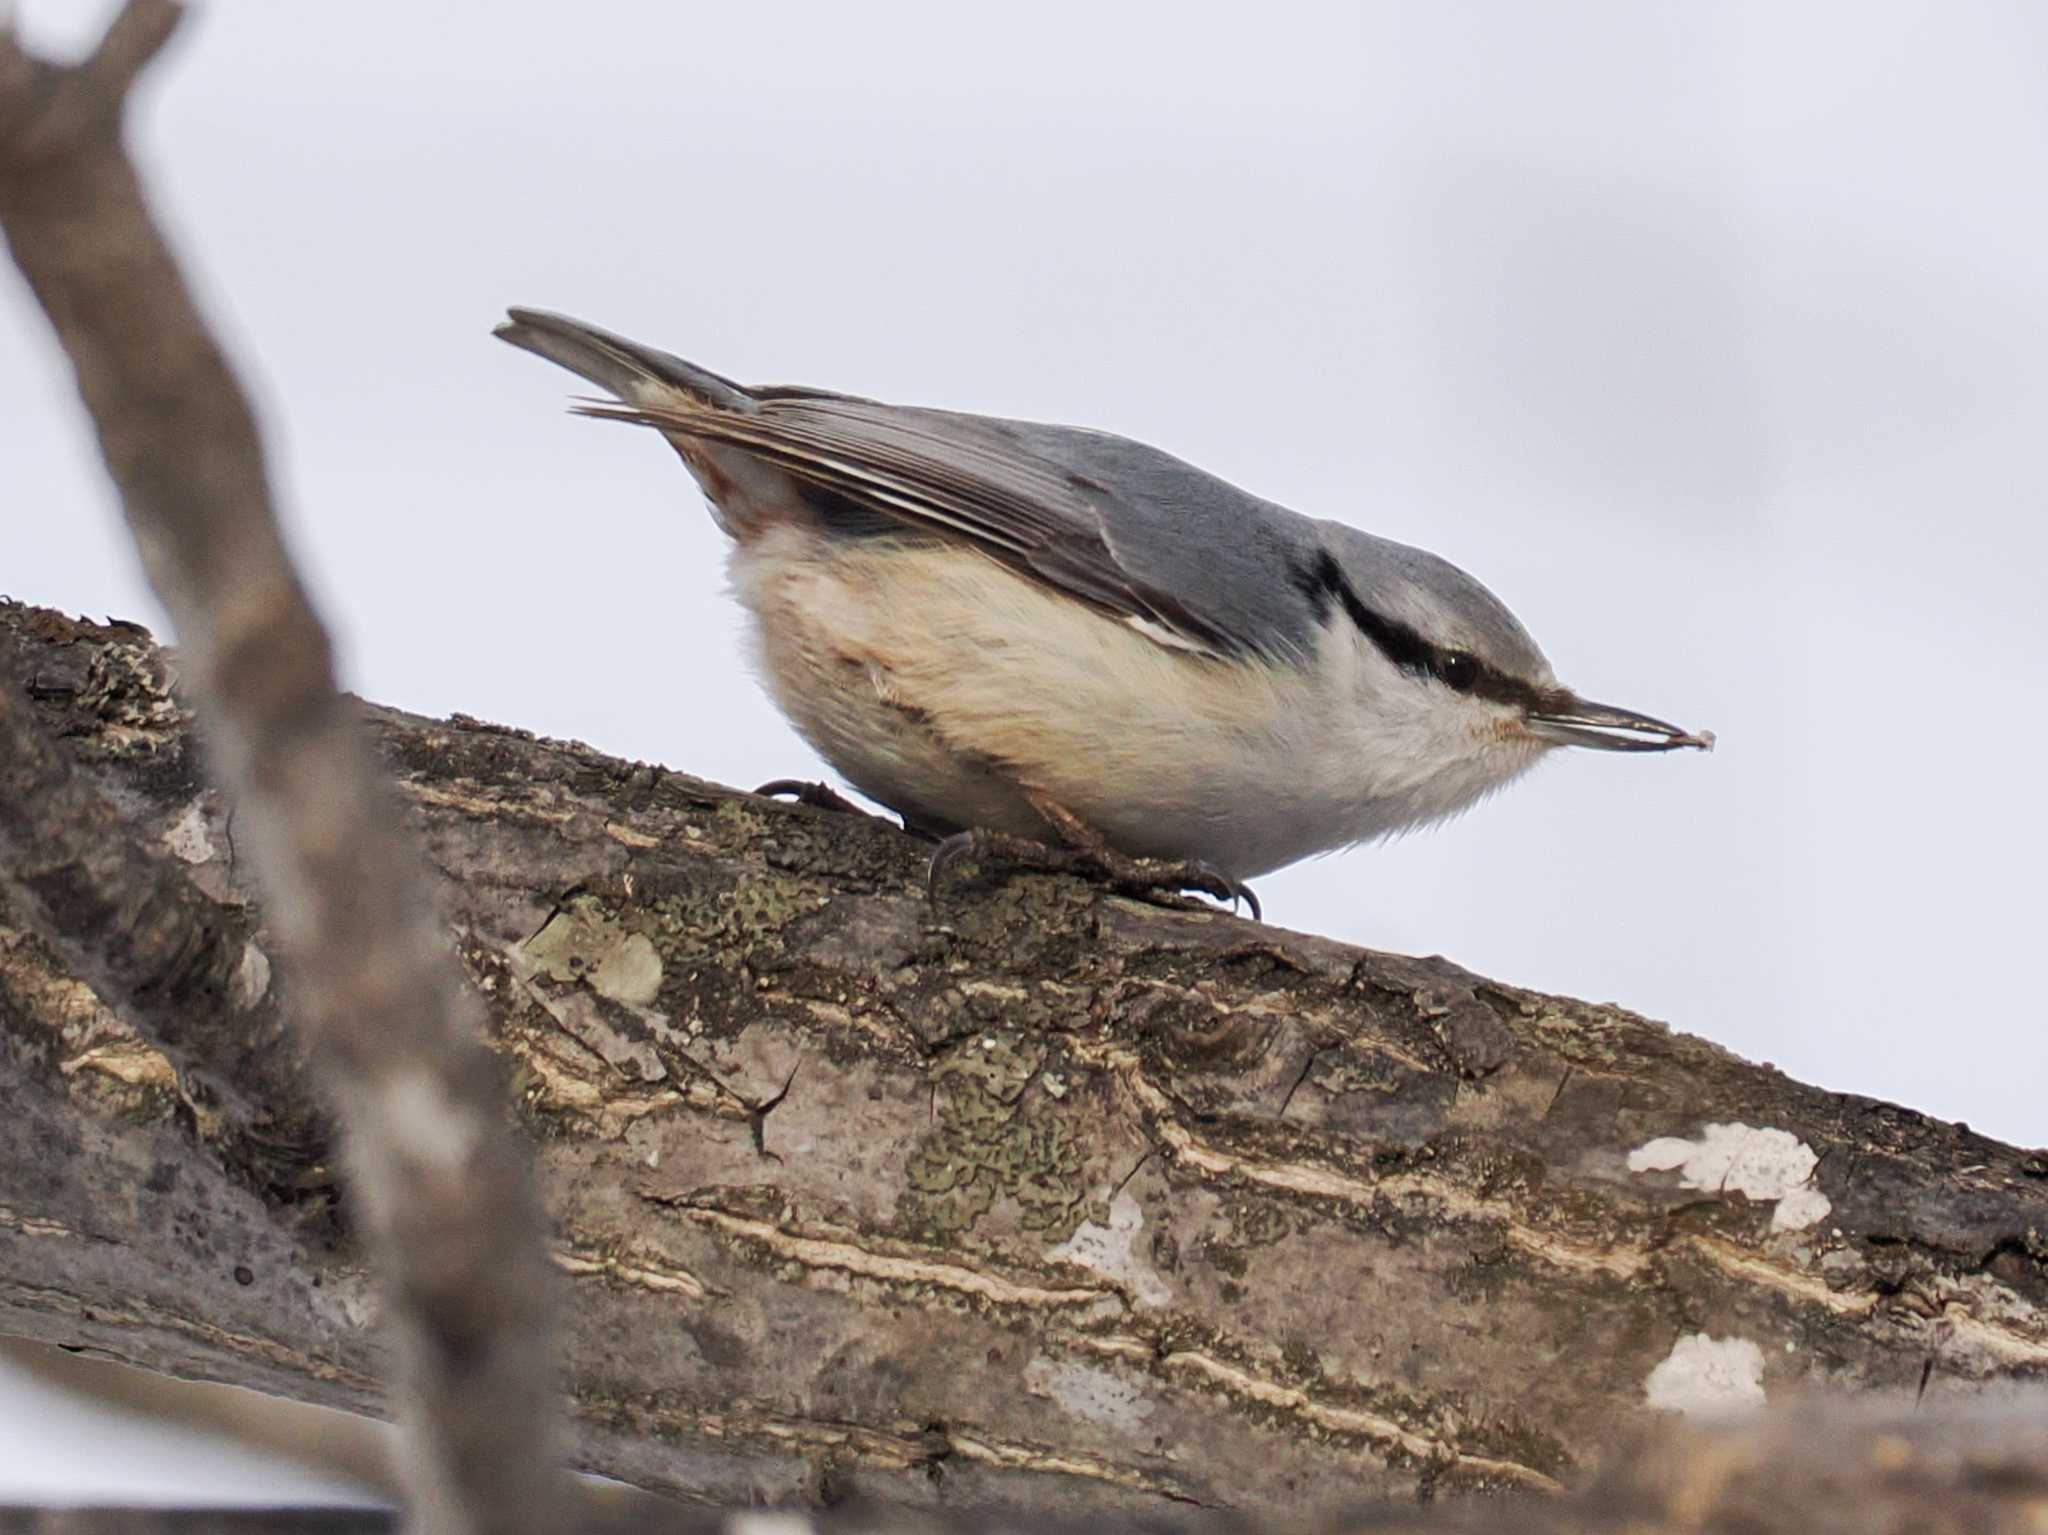 Photo of Eurasian Nuthatch(asiatica) at 石狩川河口 by 98_Ark (98ｱｰｸ)